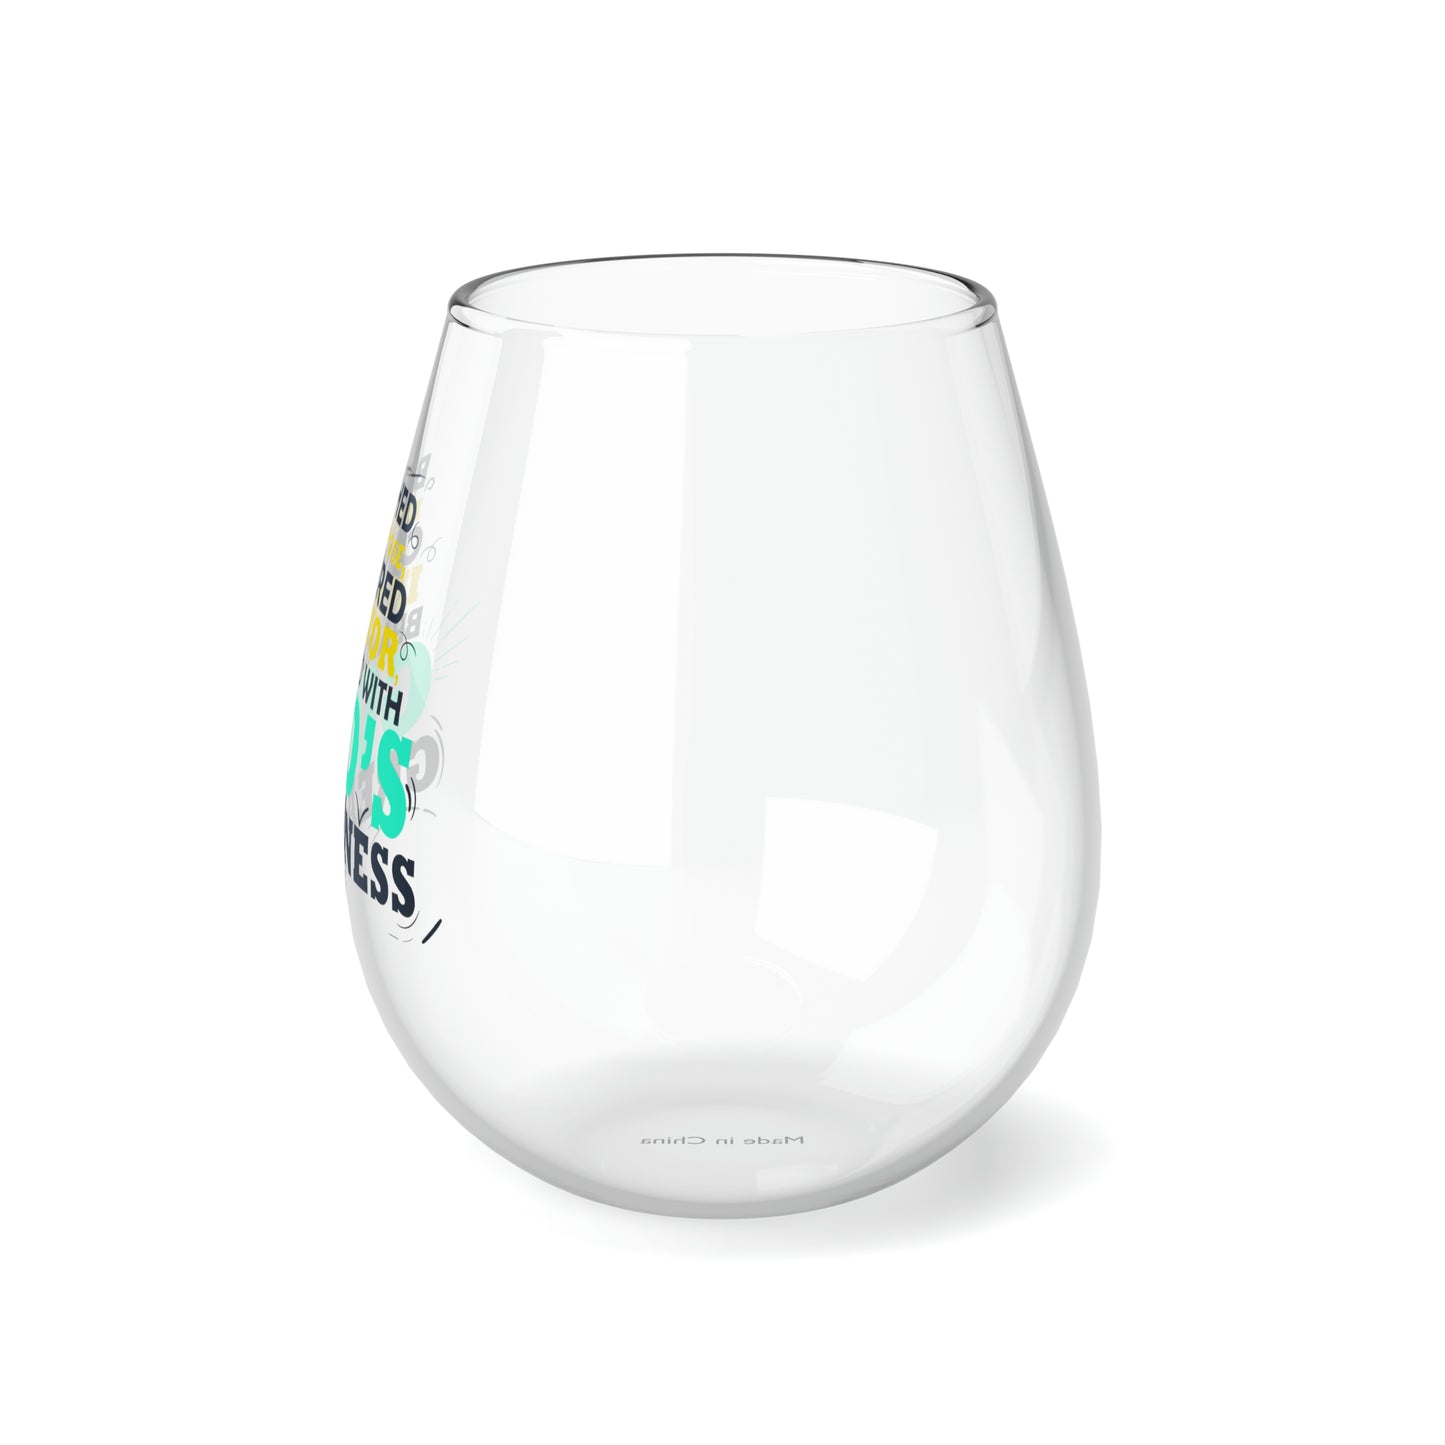 Birthed In Purpose Covered In Favor Branded With God's Greatness Stemless Wine Glass, 11.75oz